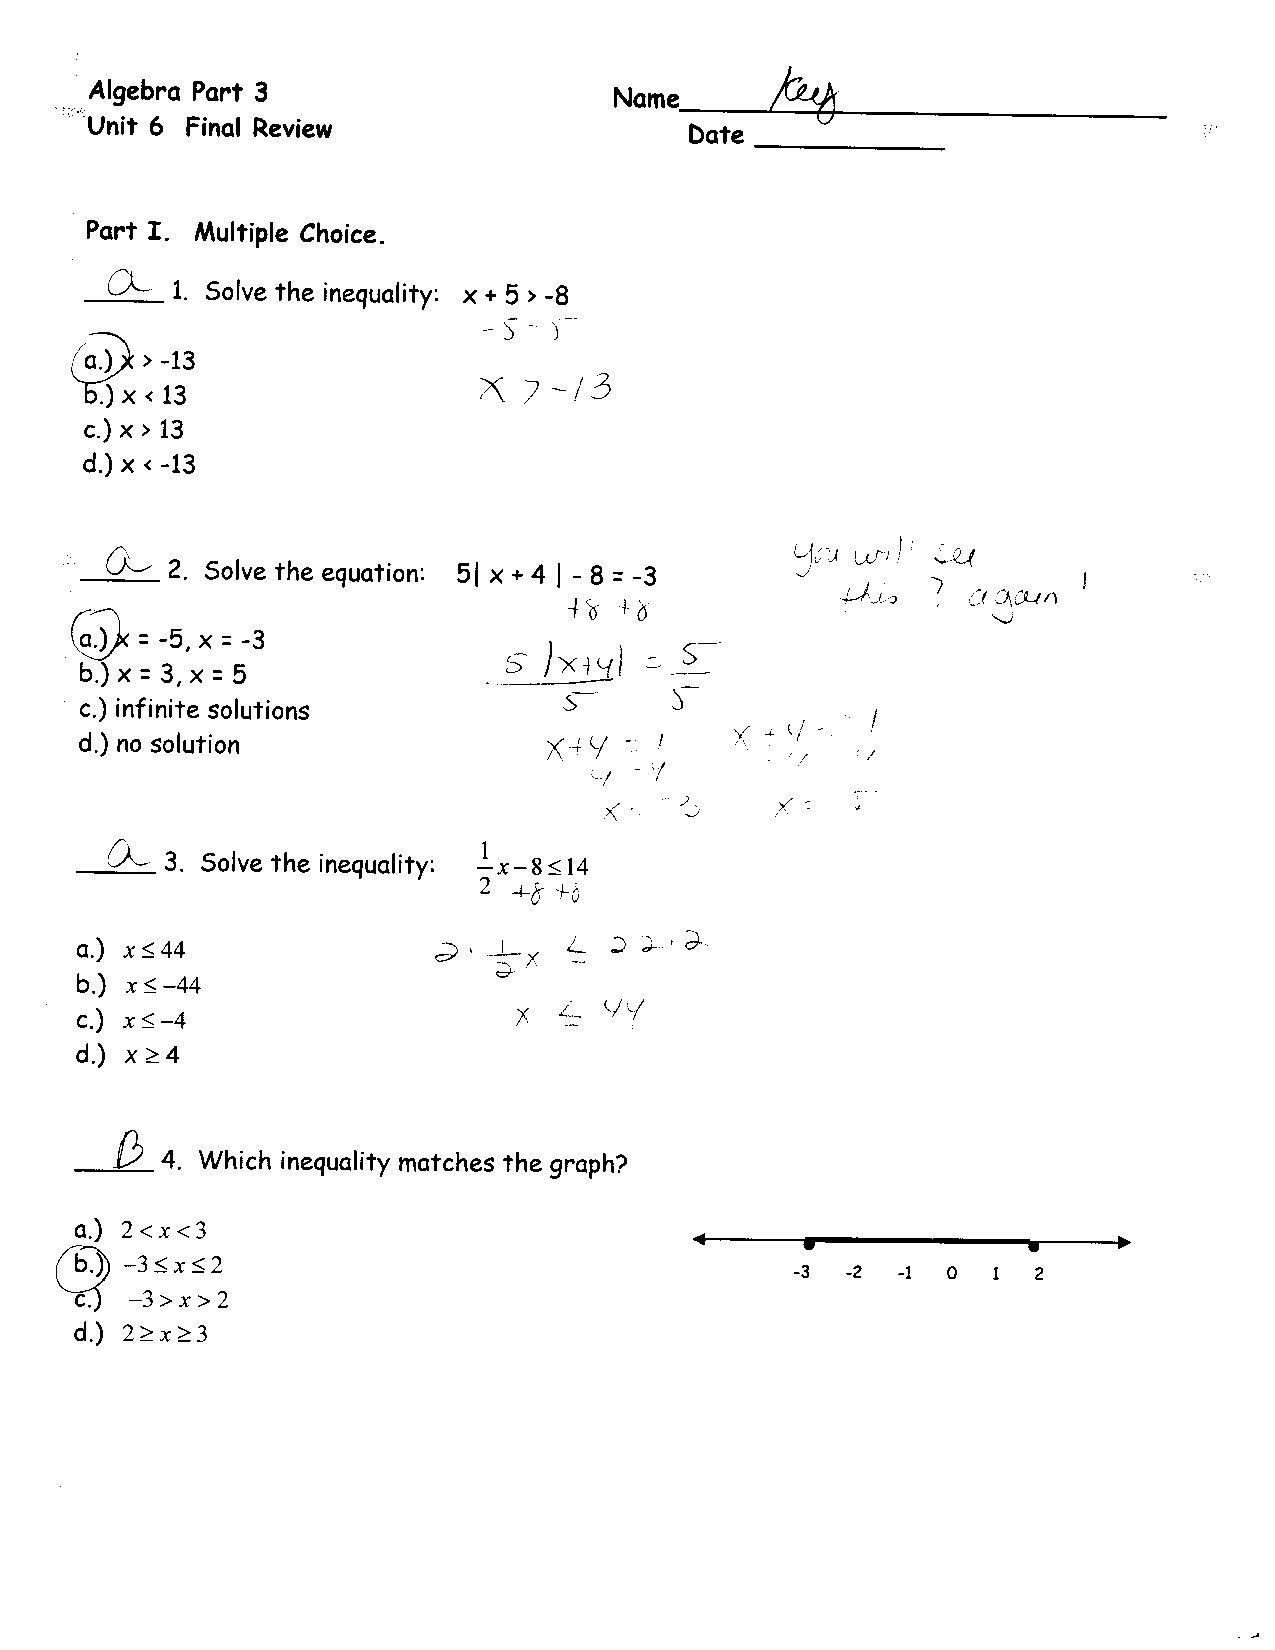 solving-systems-of-equations-word-problems-worksheet-answer-key-db